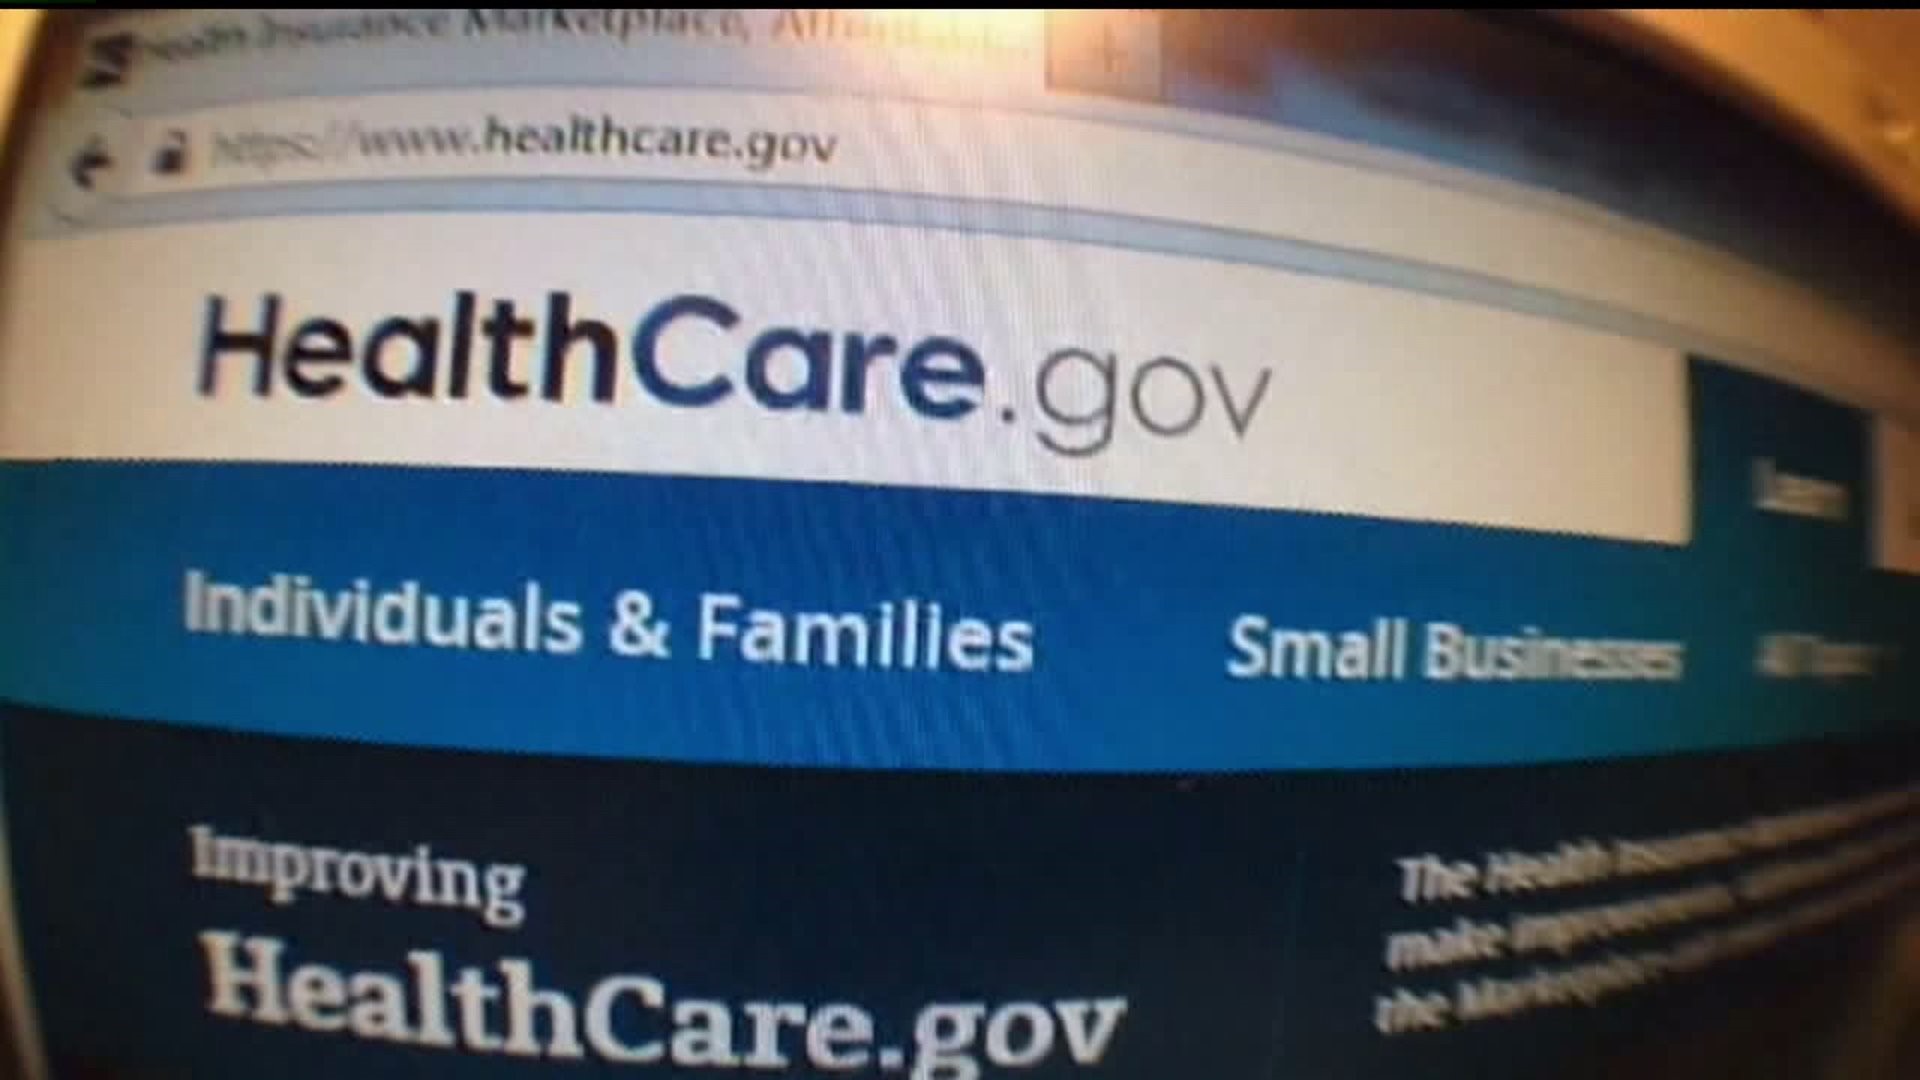 Last day to sign up for healthcare coverage